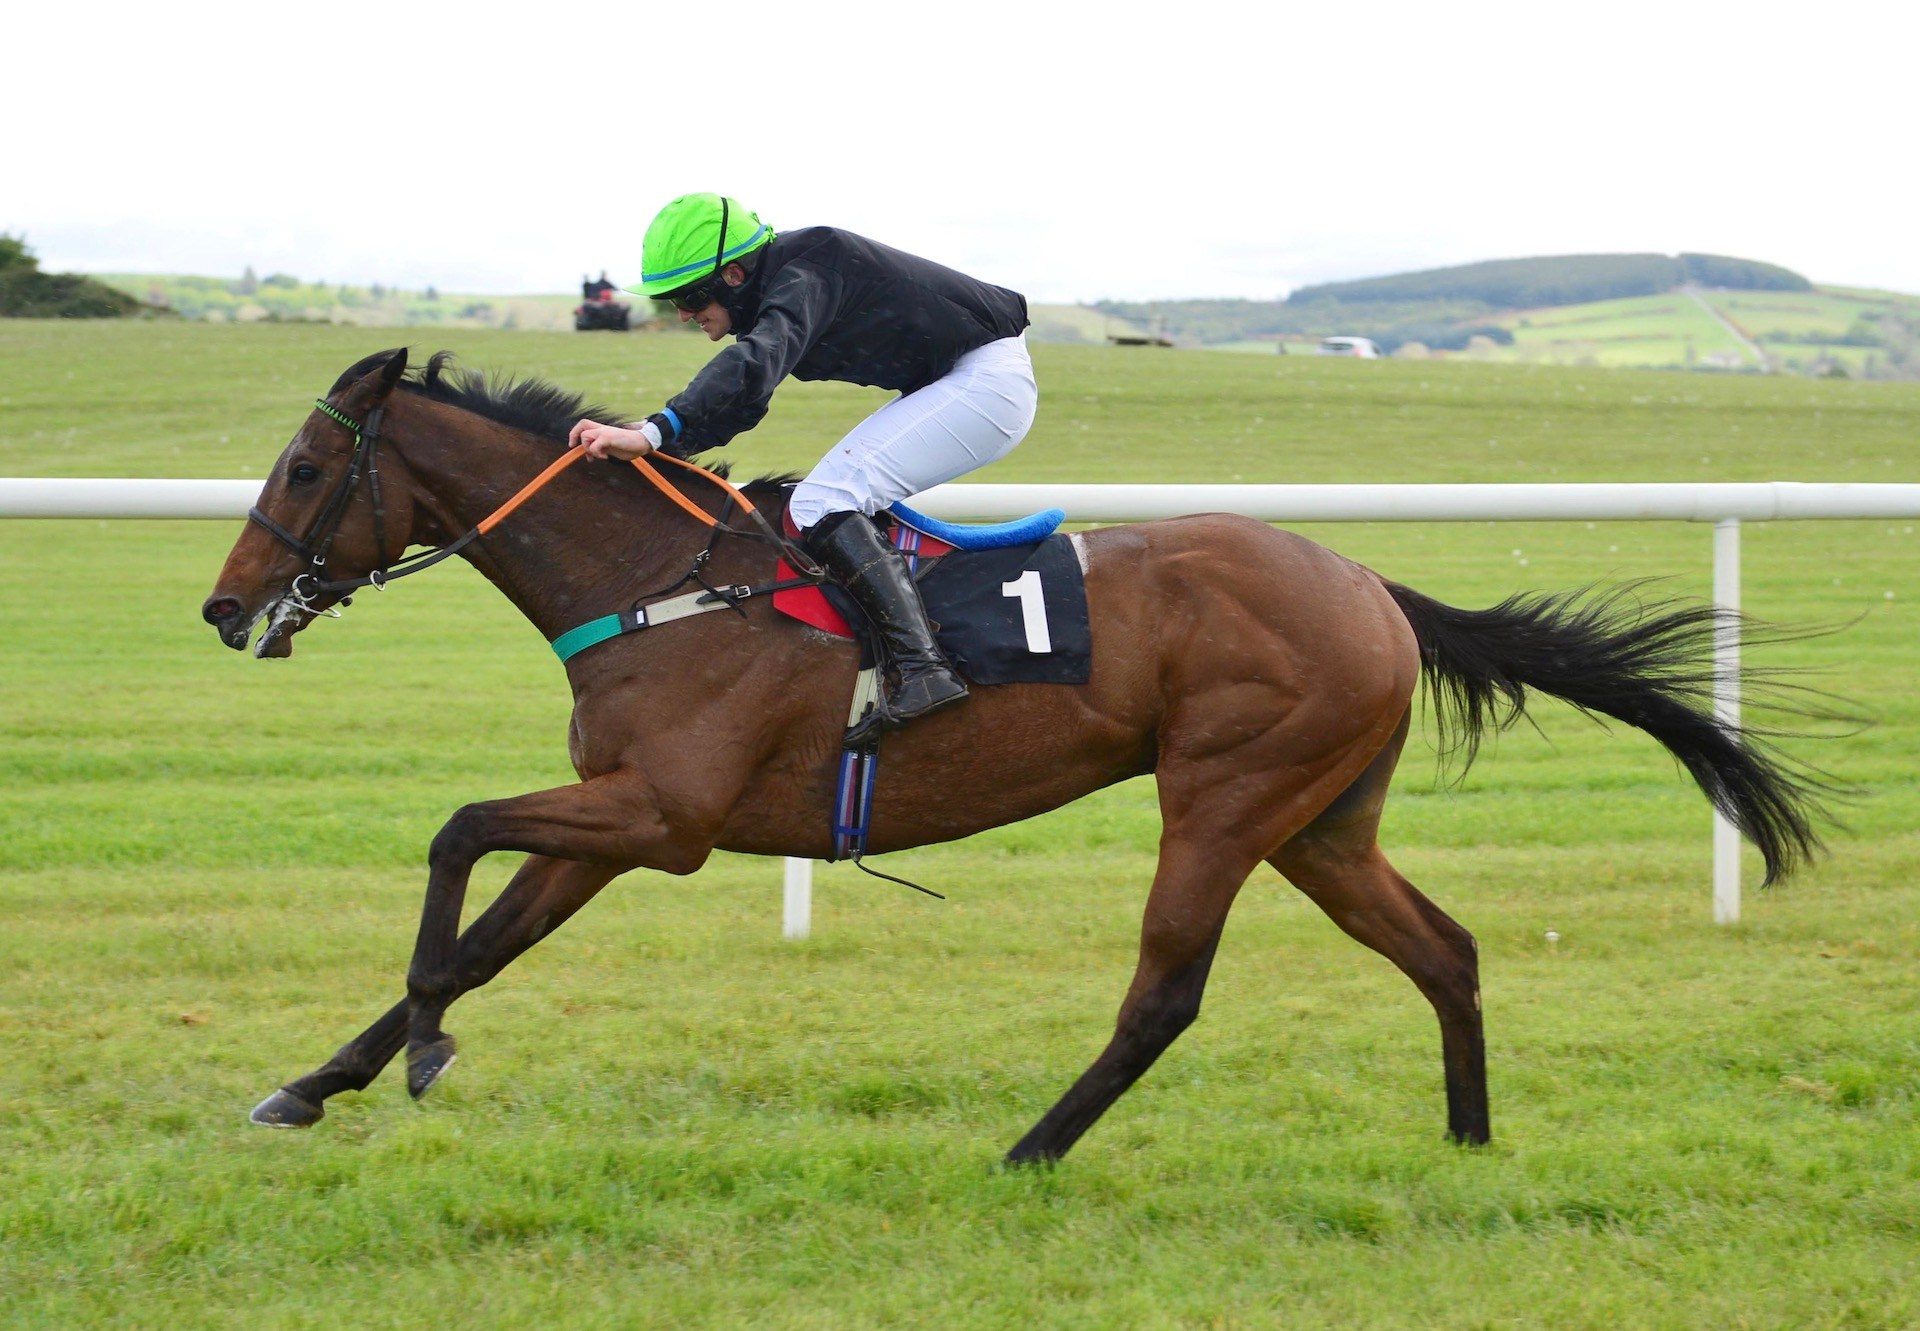 A Fortune Out West (Soldier Of Fortune) Wins The 4 YO Maiden At Punchestown